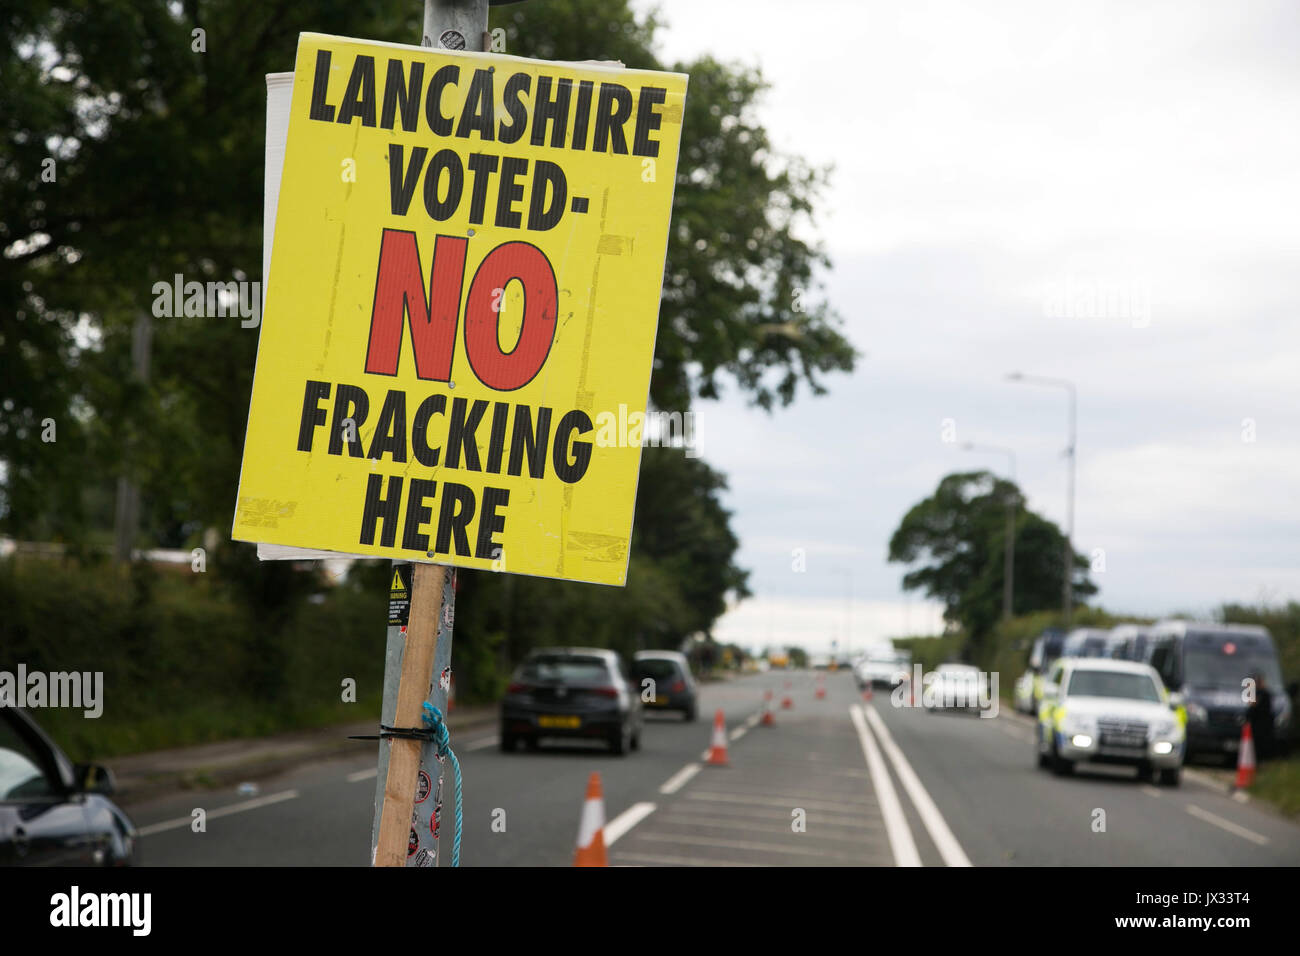 A sign posted in the road outside Quadrilla's fracking site in Lancashire. the sign states that Lancashire voted no to fracking. Stock Photo